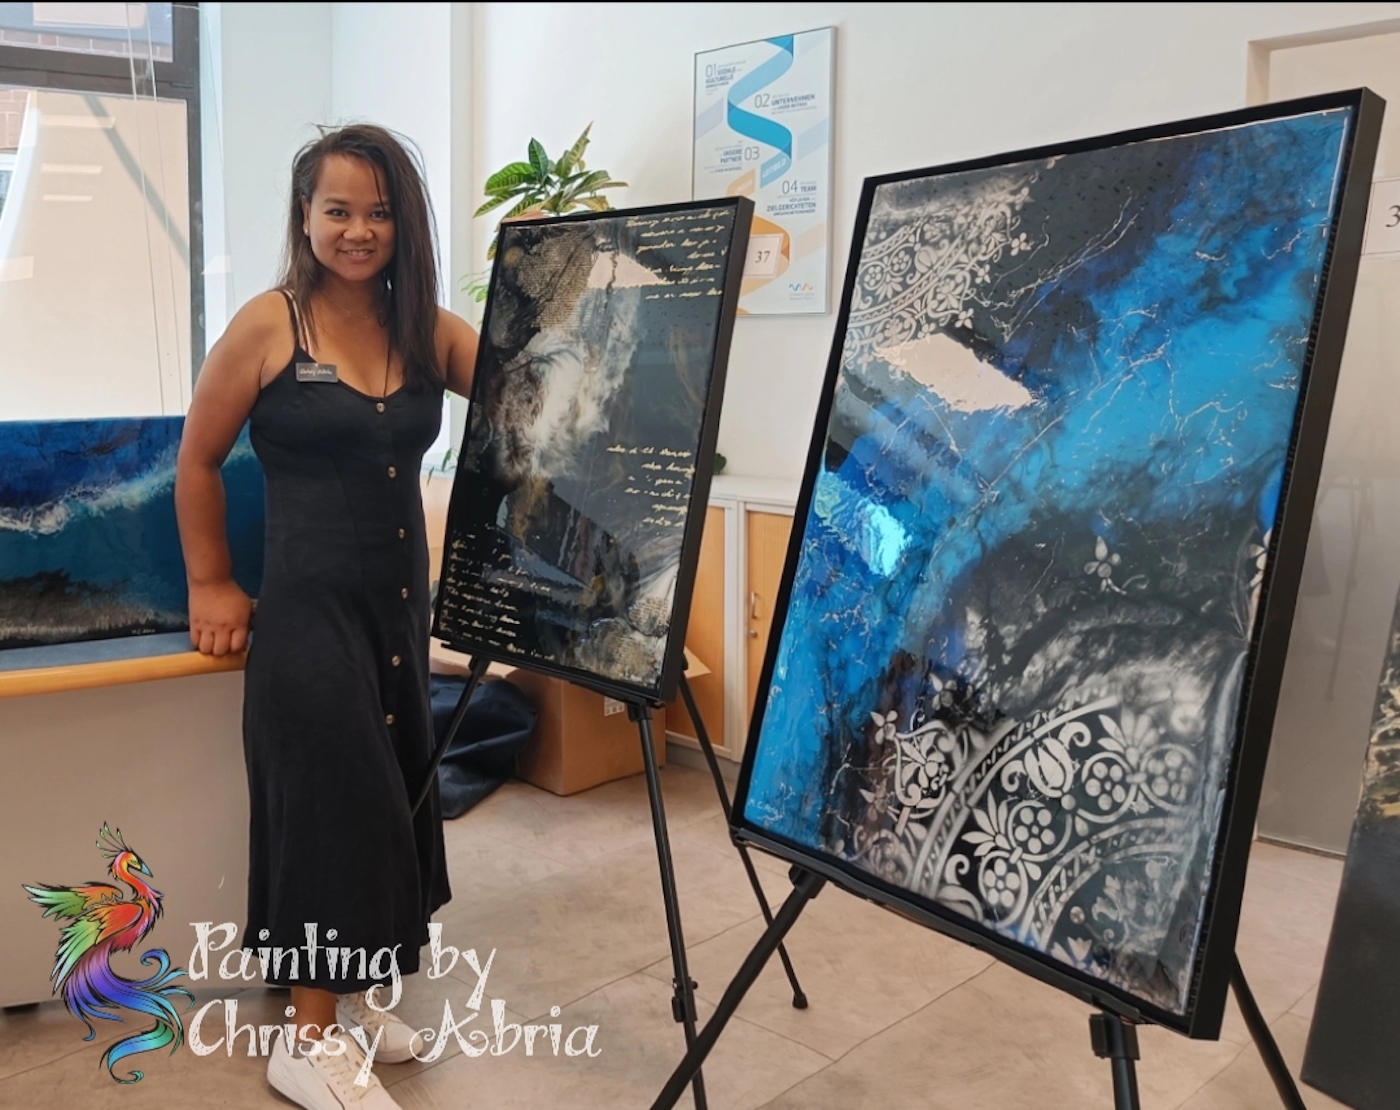 abria-painting-by-chrissy-abria_1665237958121